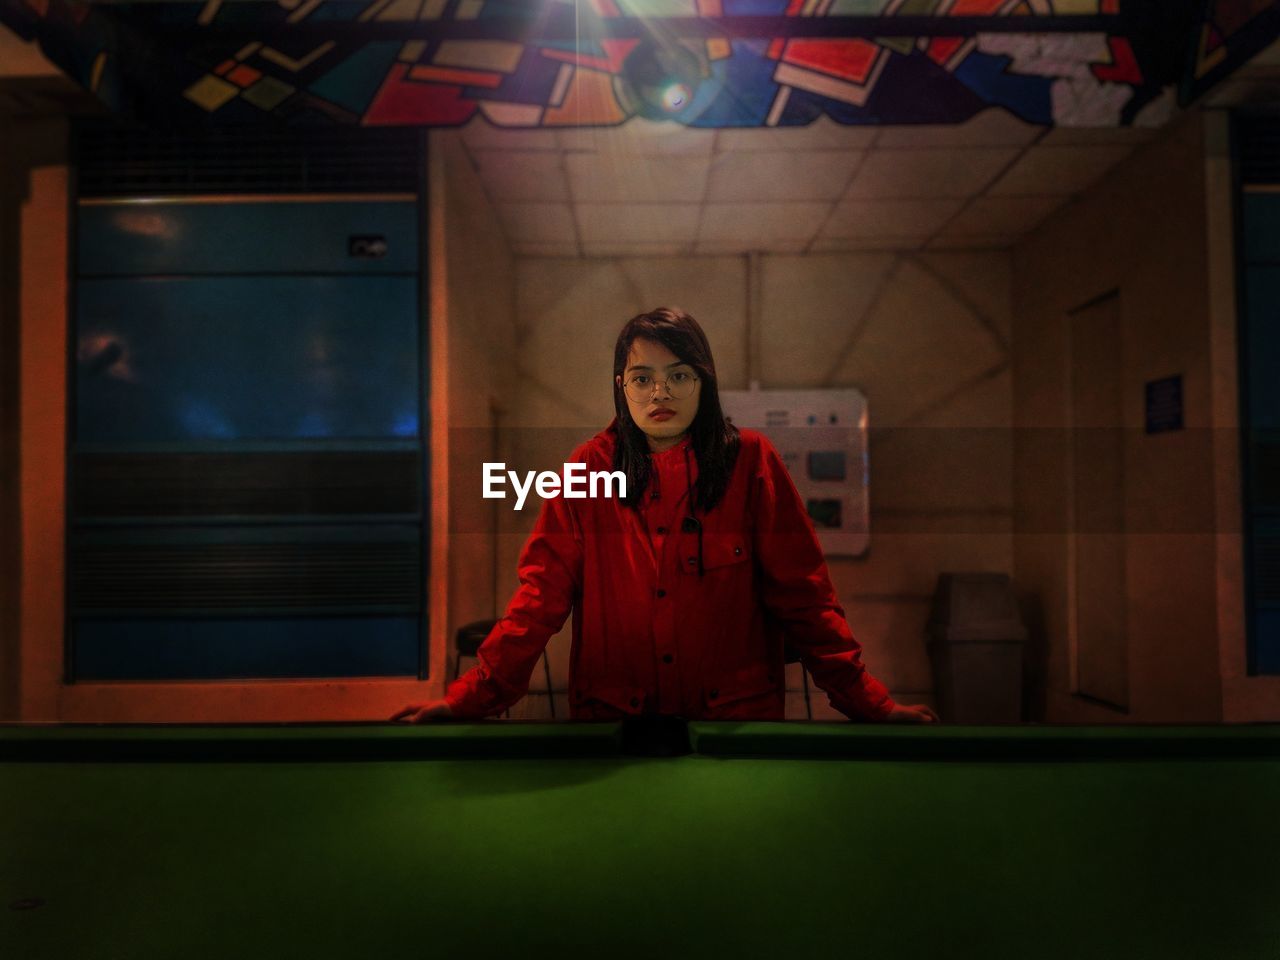 Portrait of woman standing by pool table